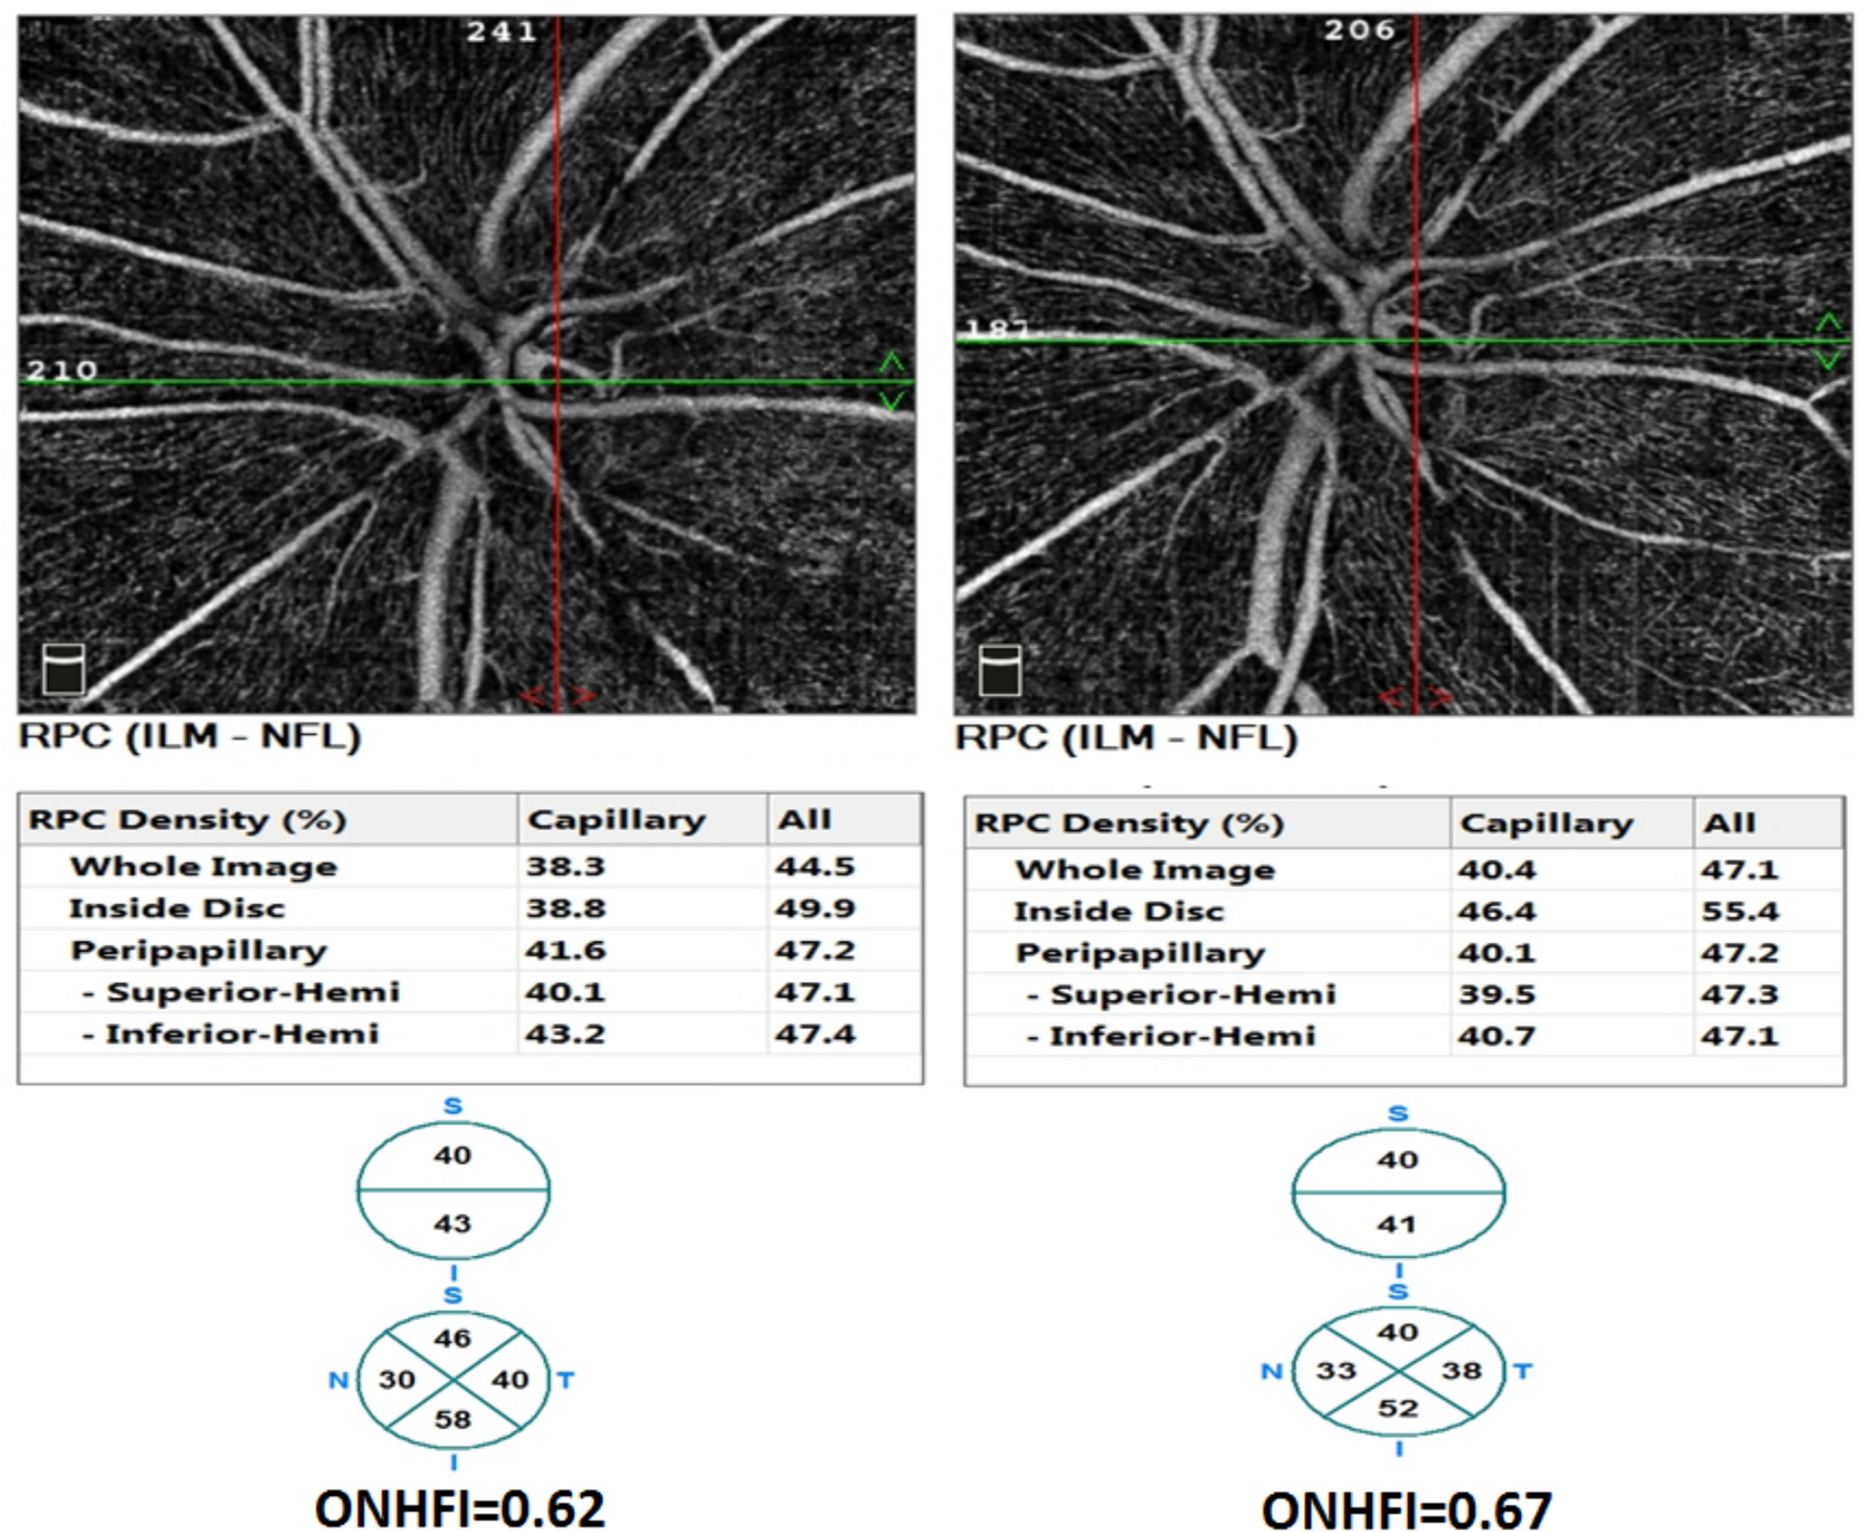 Effect of brimonidine on vascular density and imagej-derived flow index of optic nerve head and macula in primary open angle glaucoma